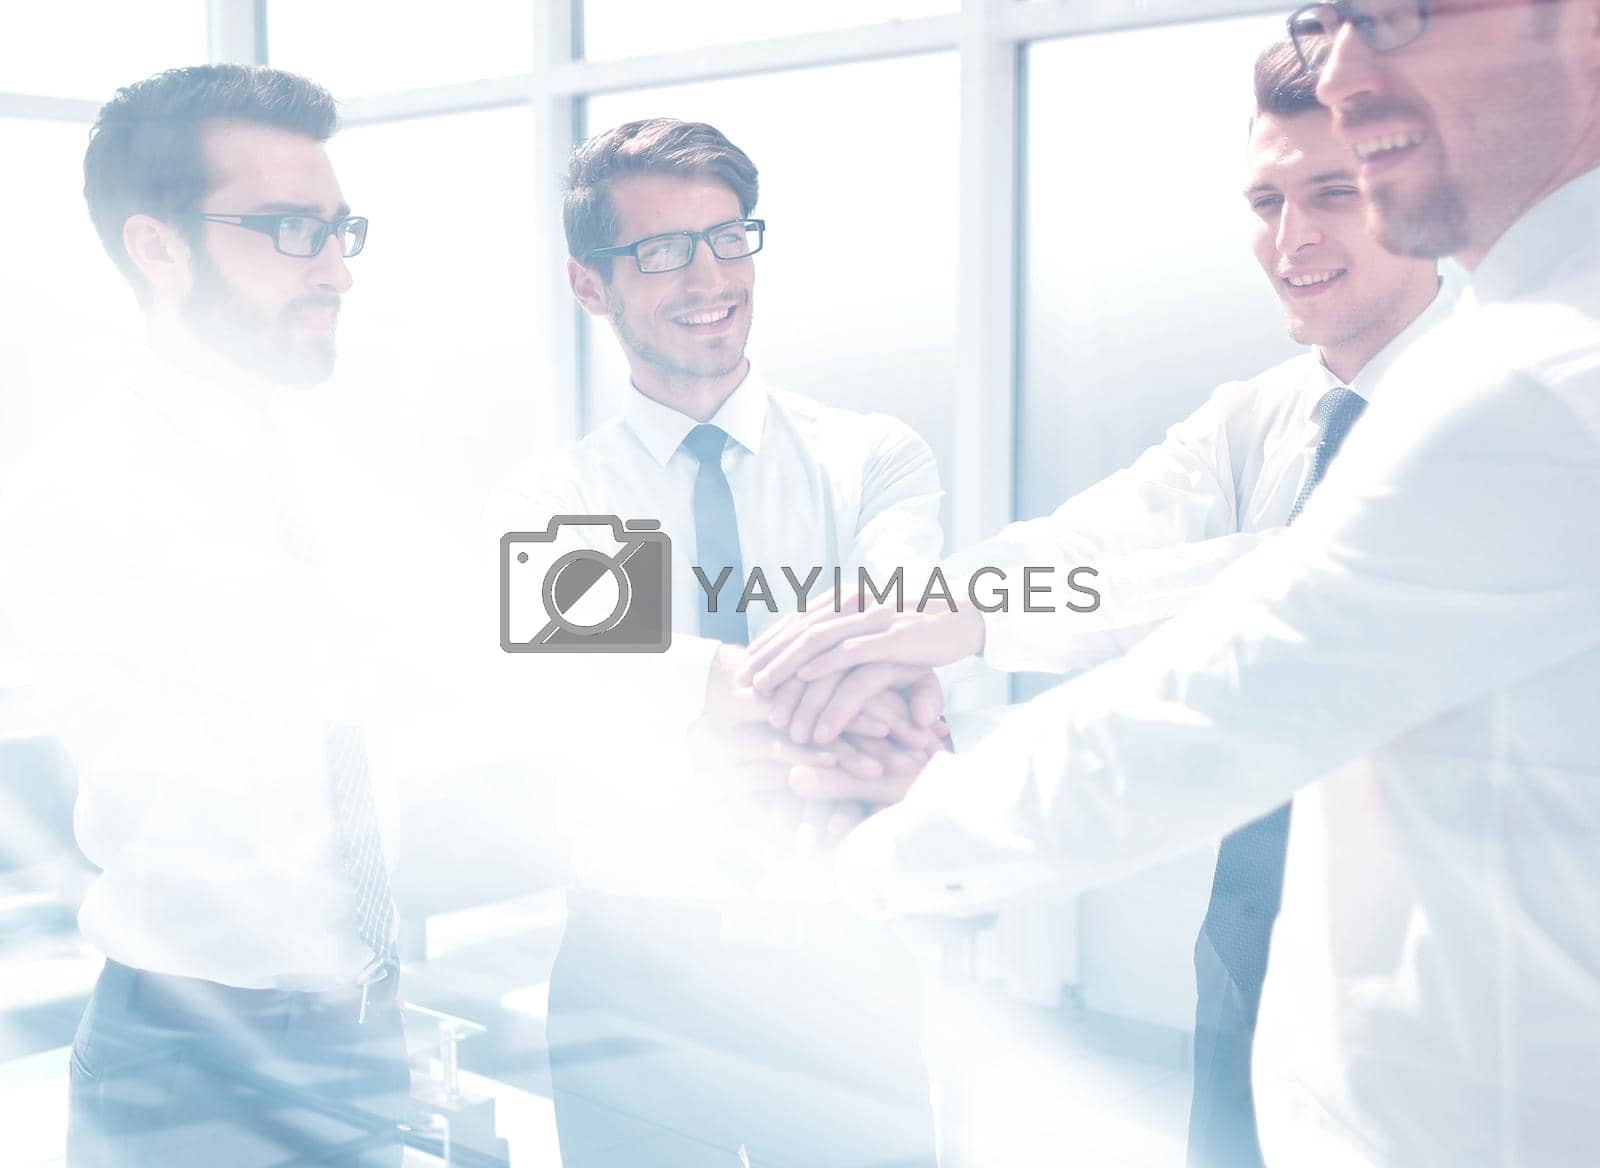 Royalty free image of successful business by showing their unity by asdf